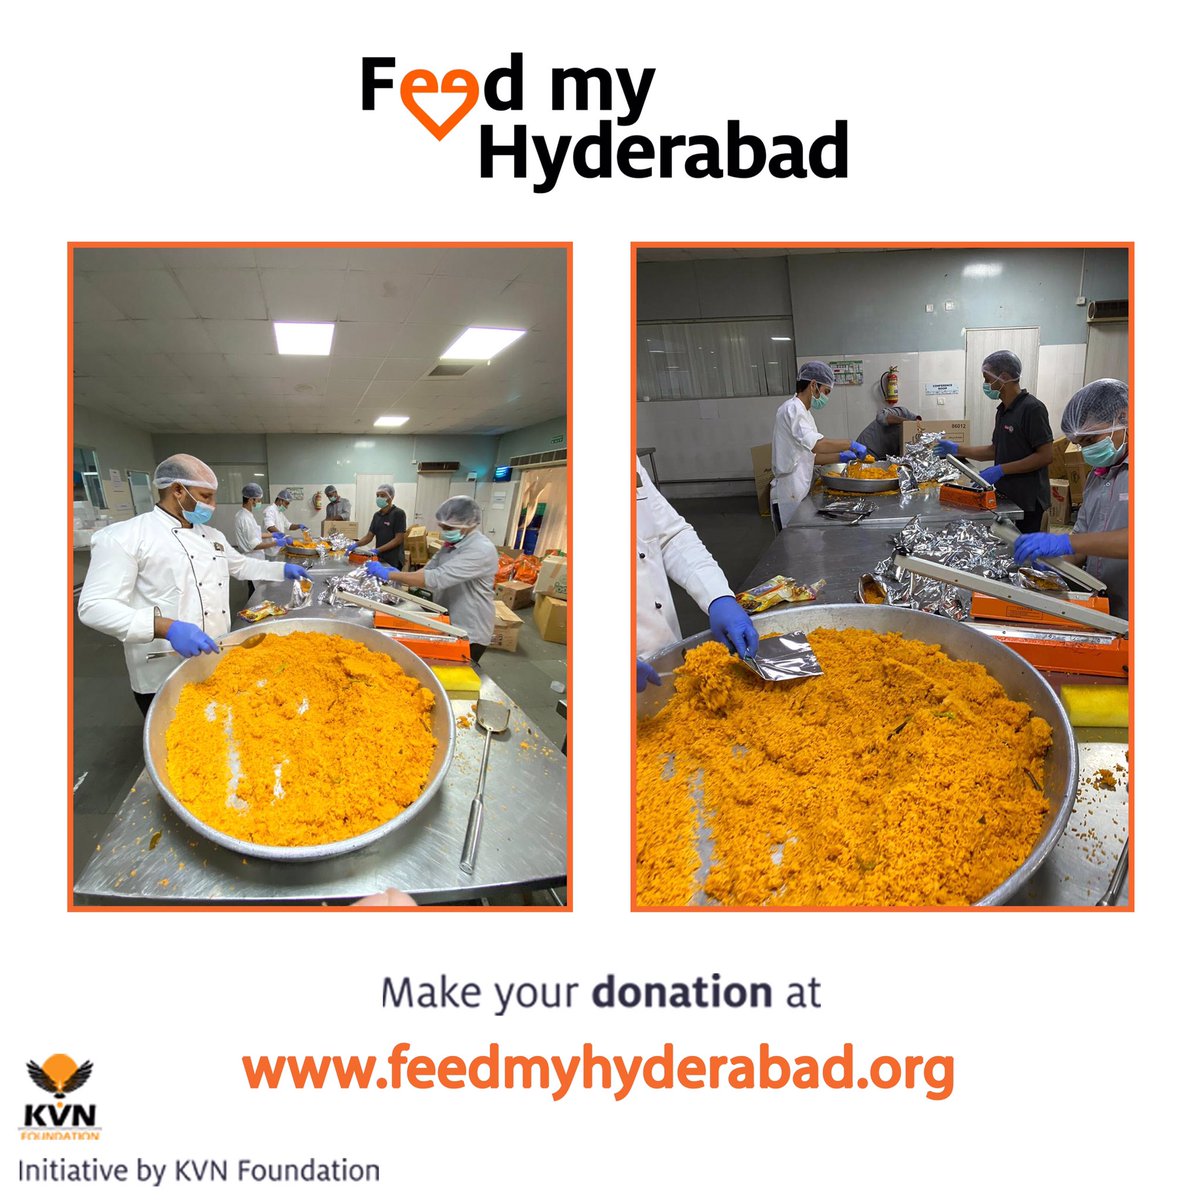 The food we serve is made using fresh ingredients and in hygienic kitchens. Join our mission and donate a meal. • Contribute now at feedmyhyderabad.org • #mission300000 #foodsoldiers #feedmyhyderabad #feedmybangalore #feedmymumbai